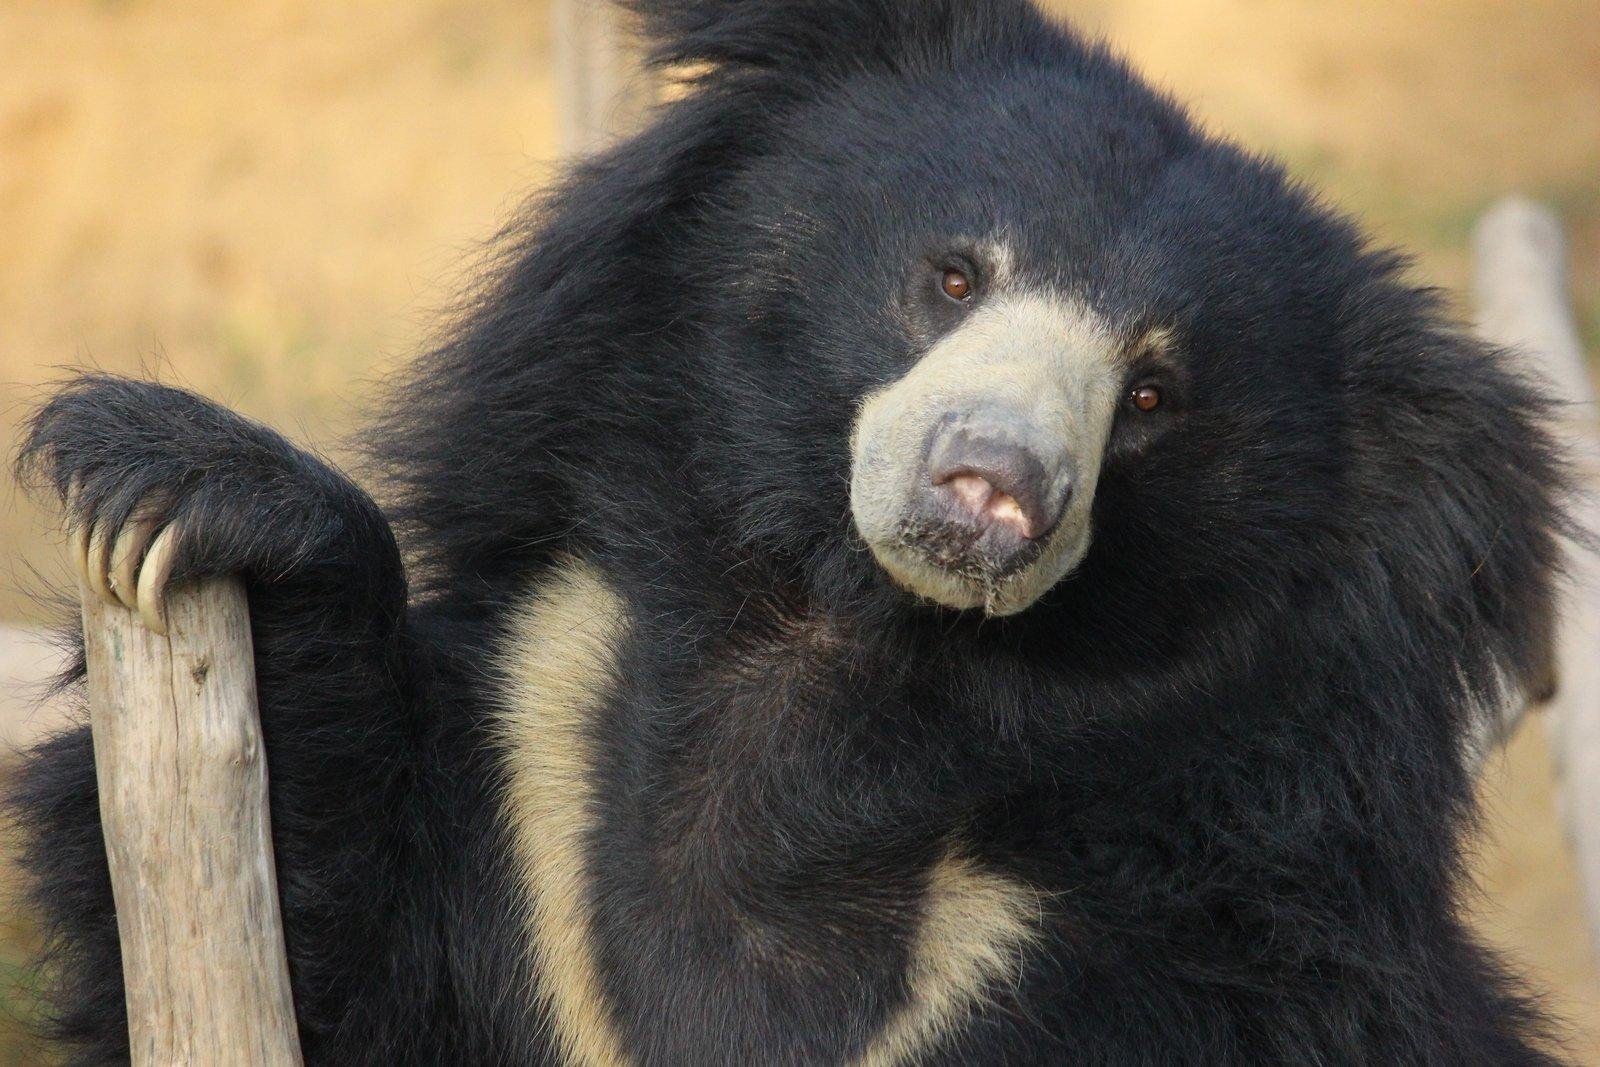 News: Breaking tradition: The path to saving India’s sloth bears  GLOBAL HEROES MAGAZINE